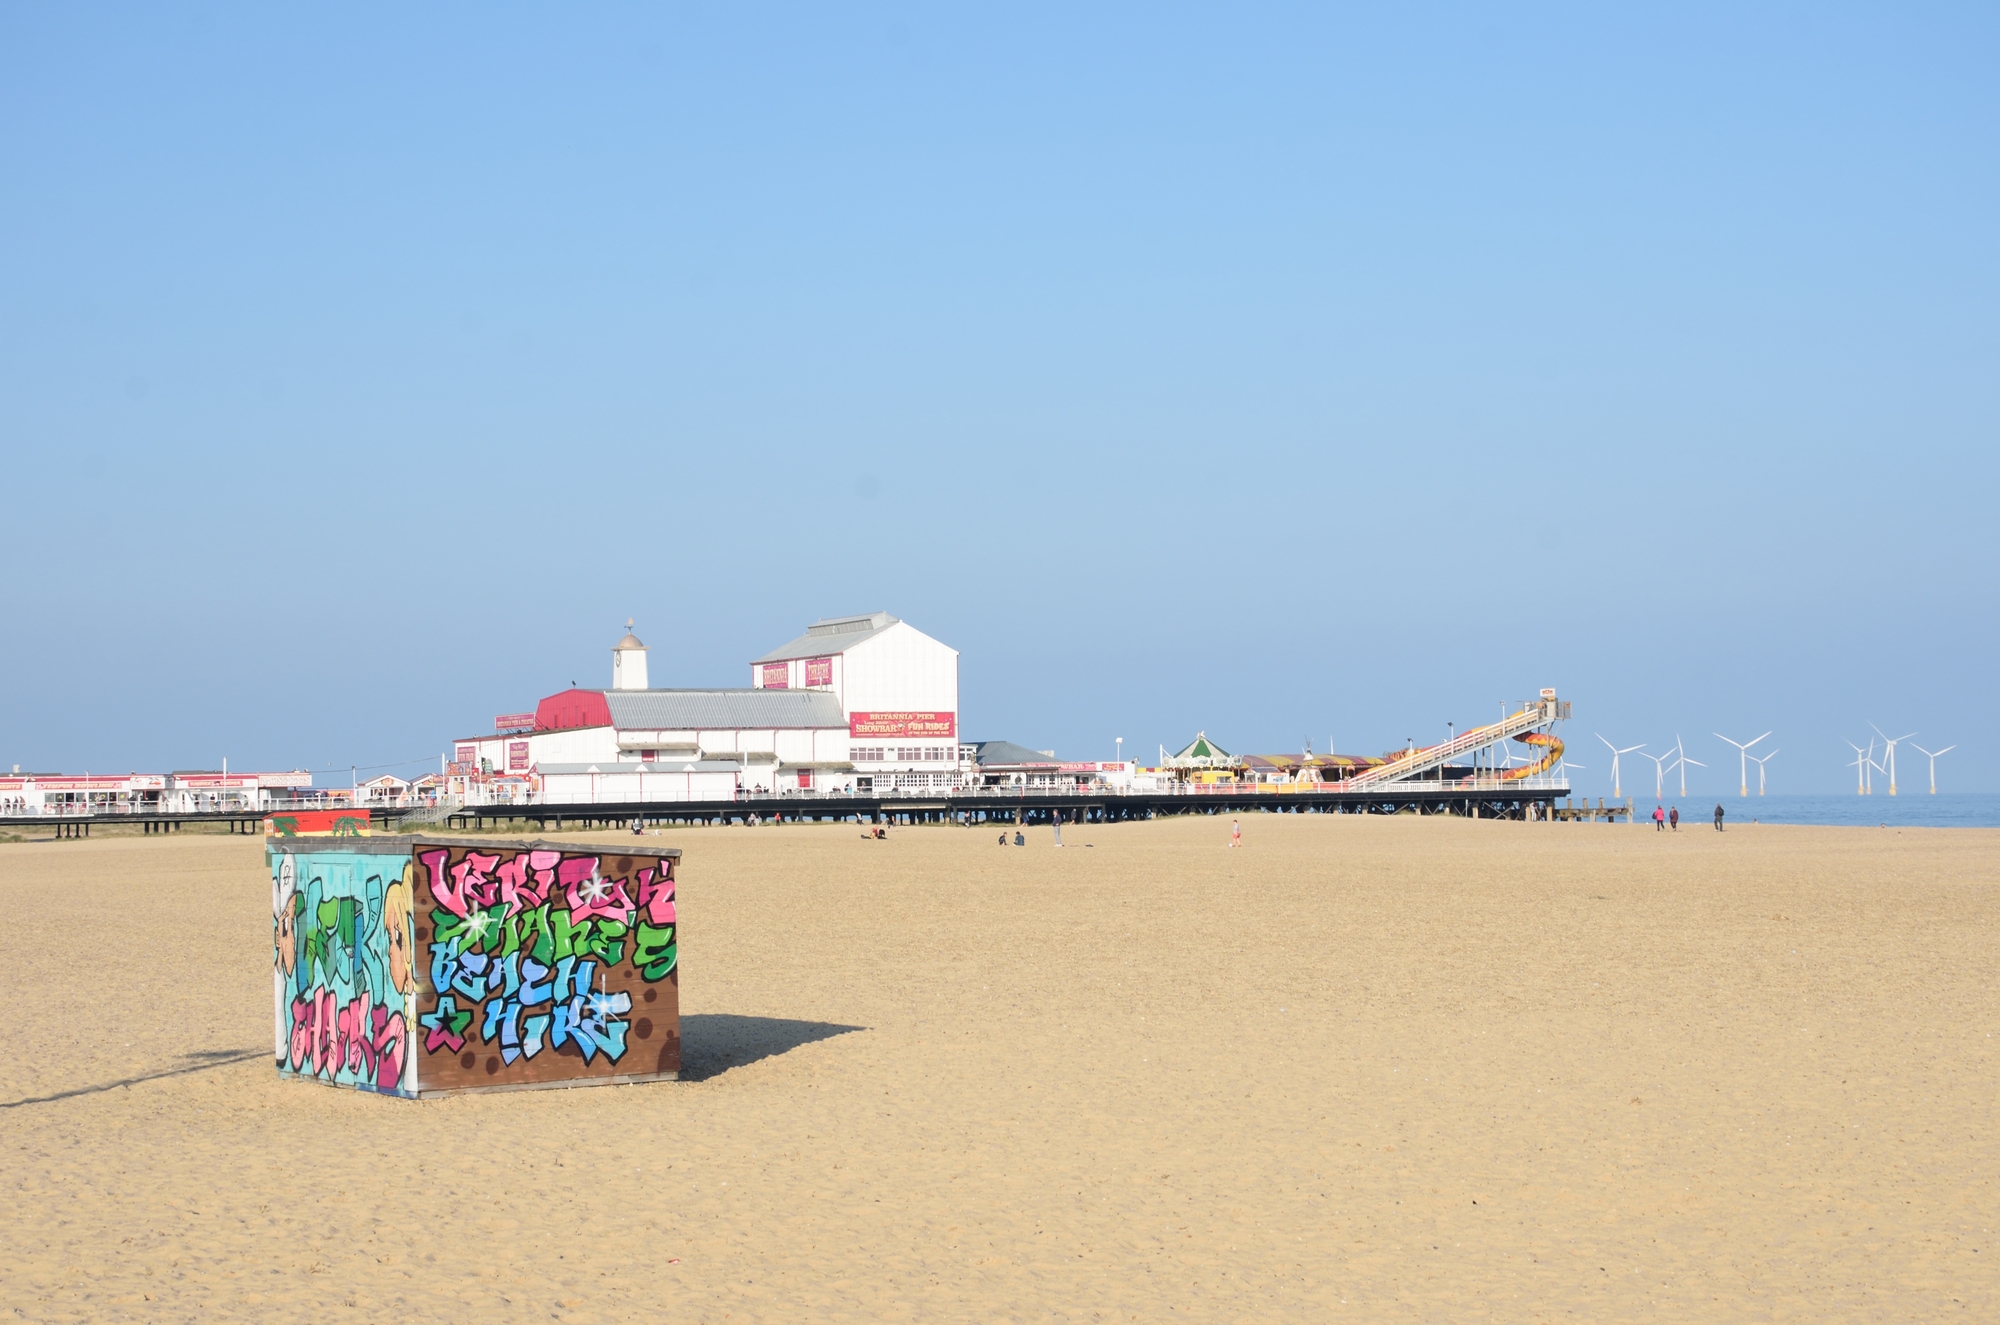 view of great yarmouth beach with the pier in view and a deckchair hut